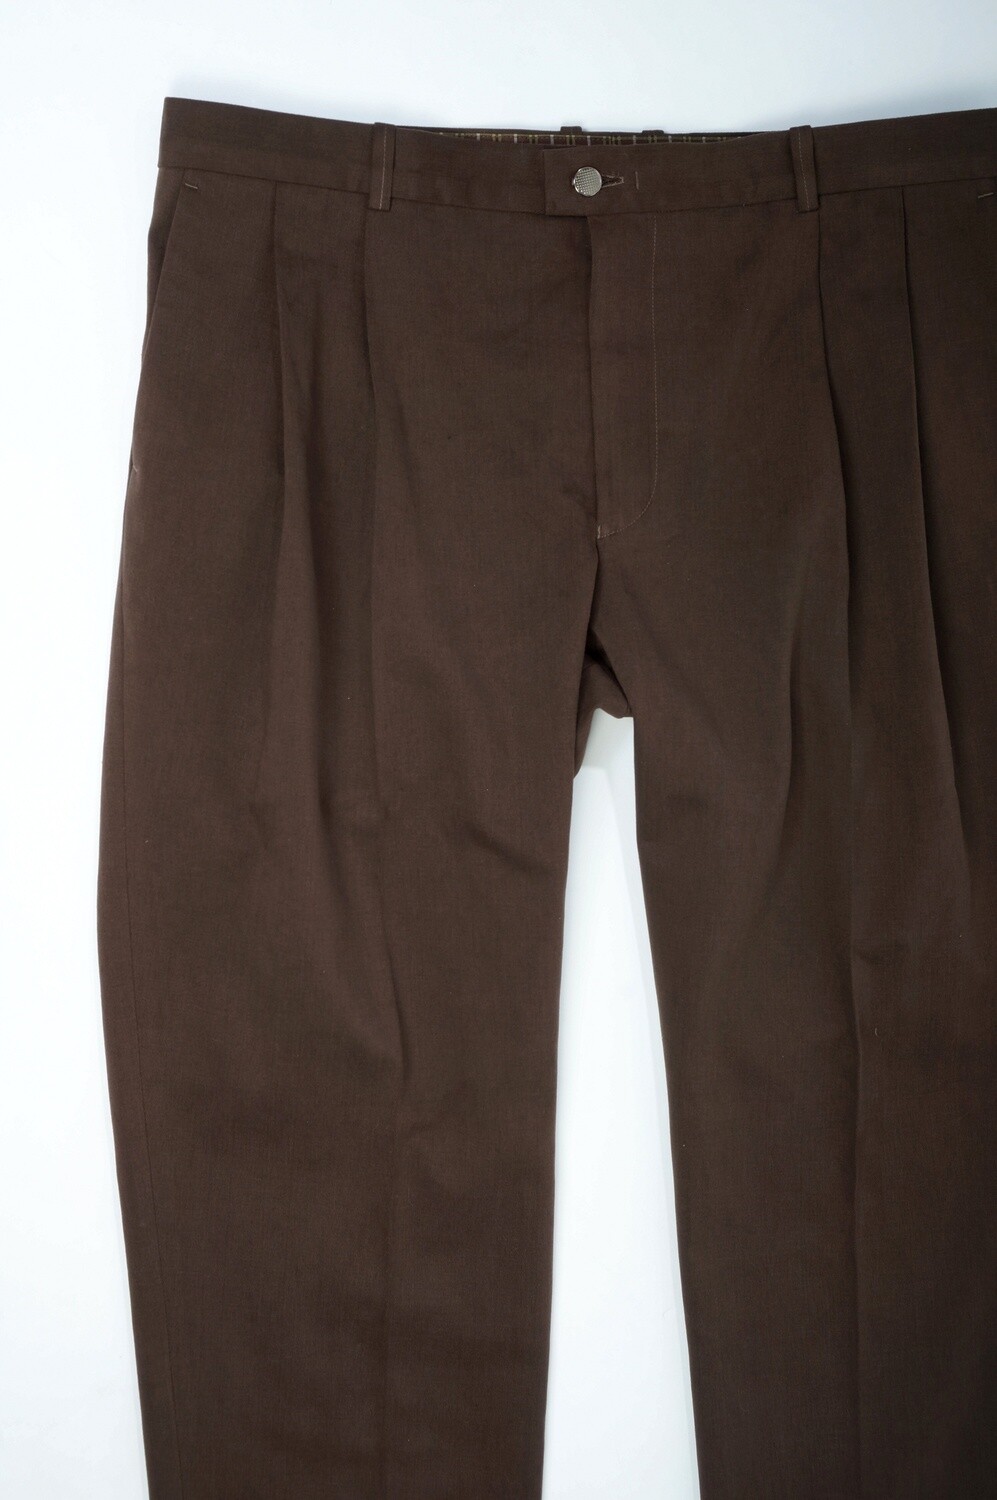 Examples of sewing trousers